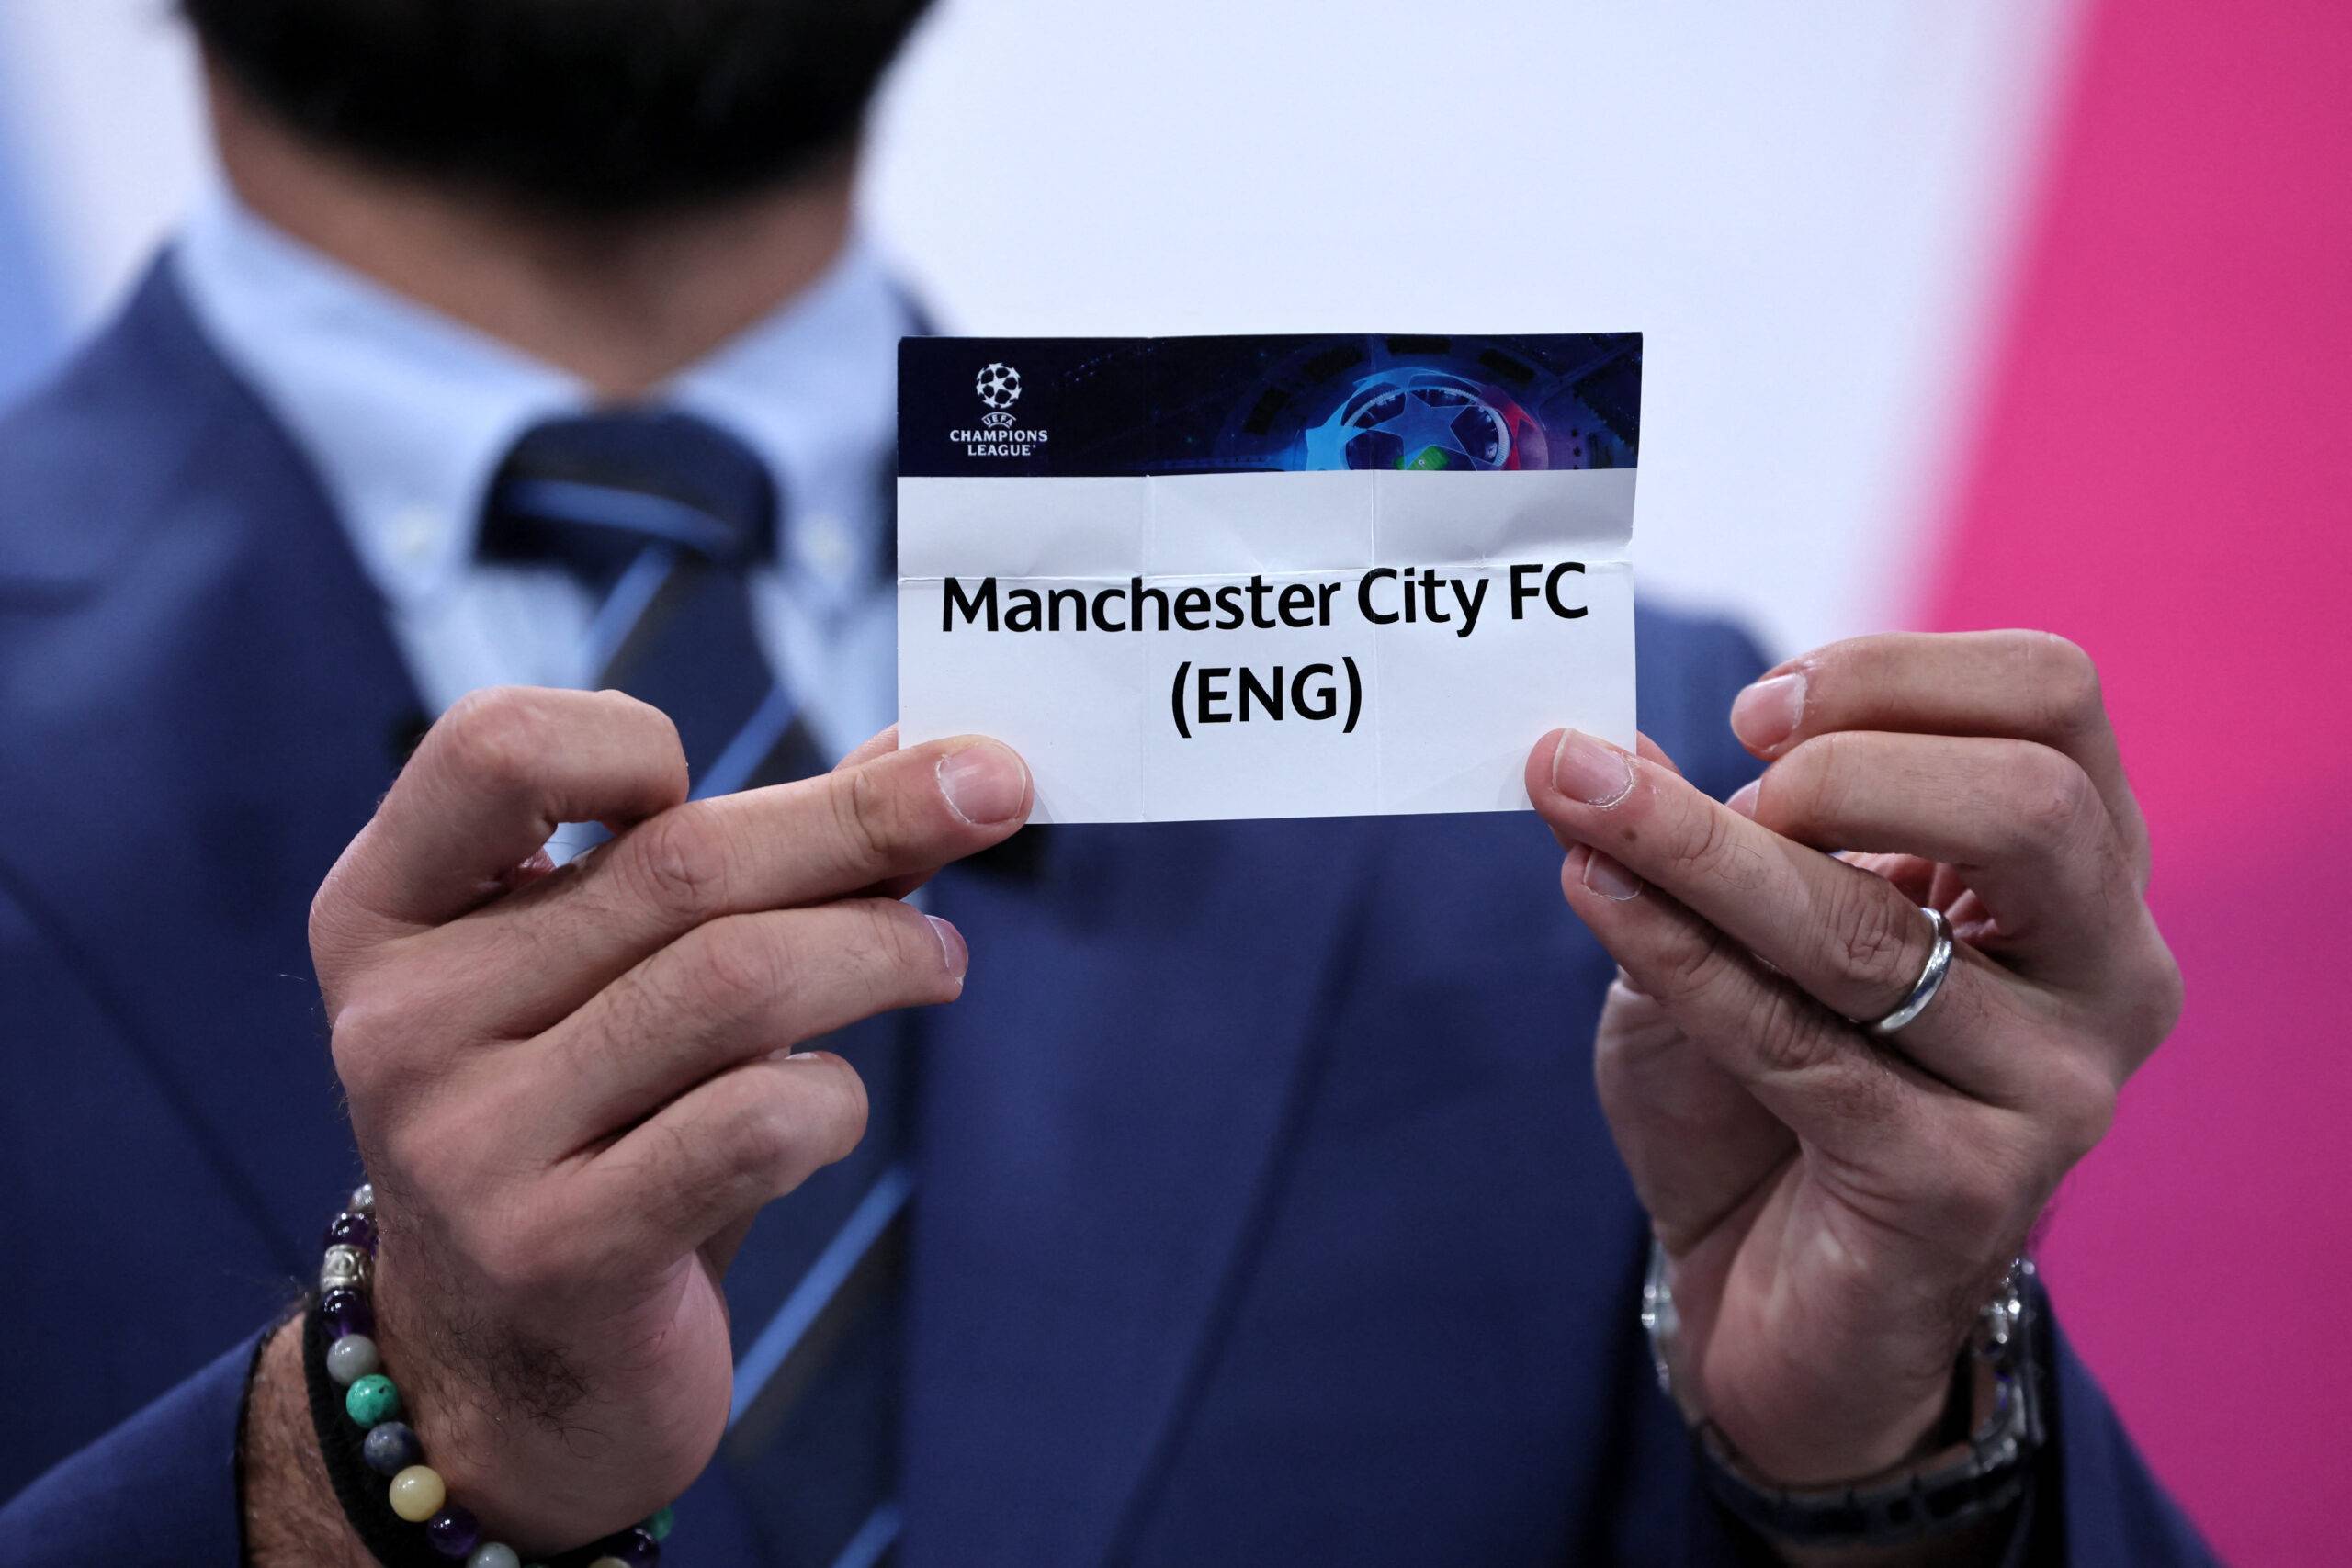 Man City are drawn in the Champions League